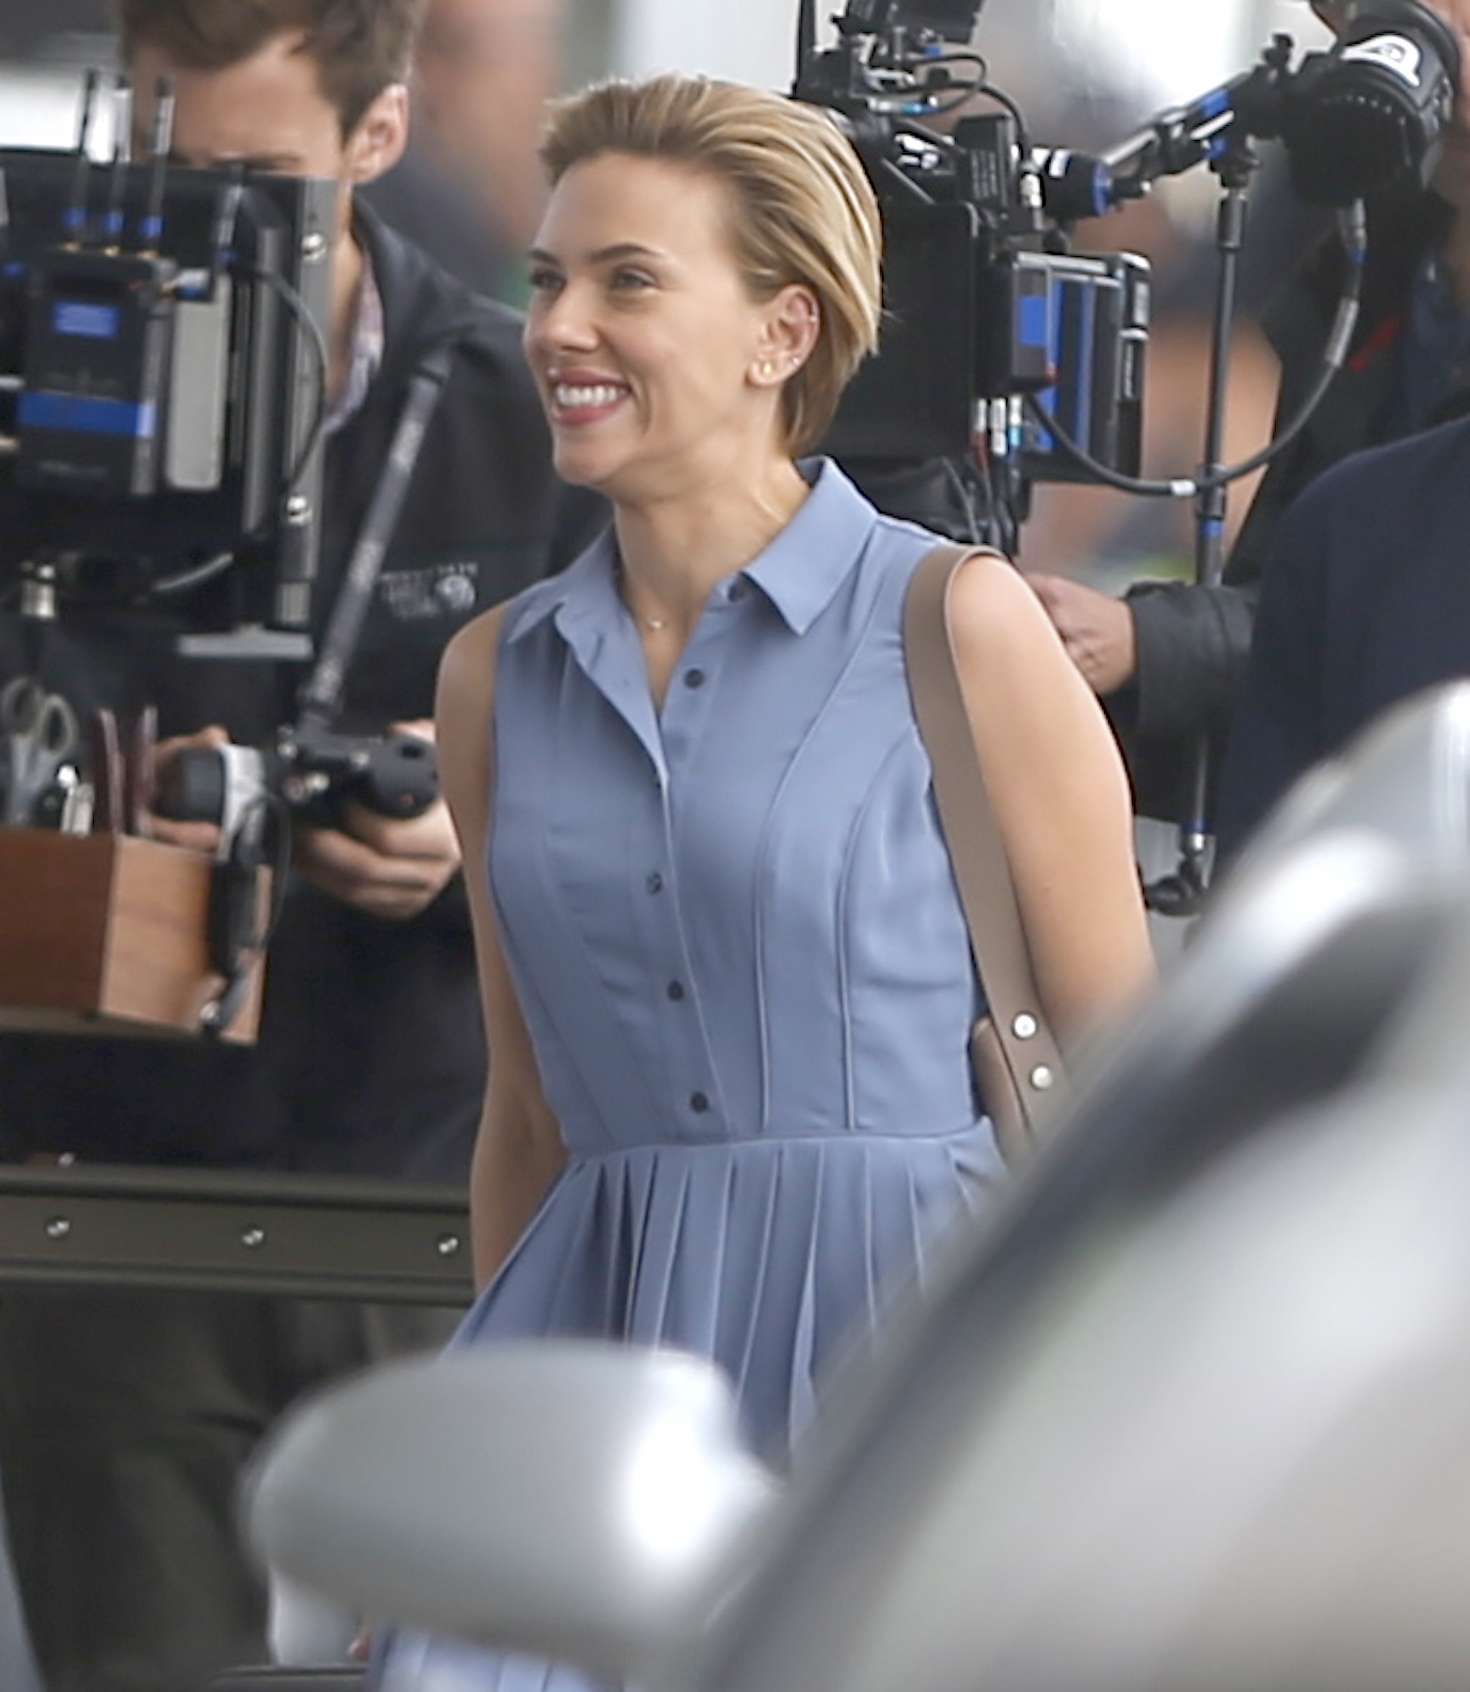 Scarlett Johansson Filming a Scene for 'Rock That Body' at Airport in NYC